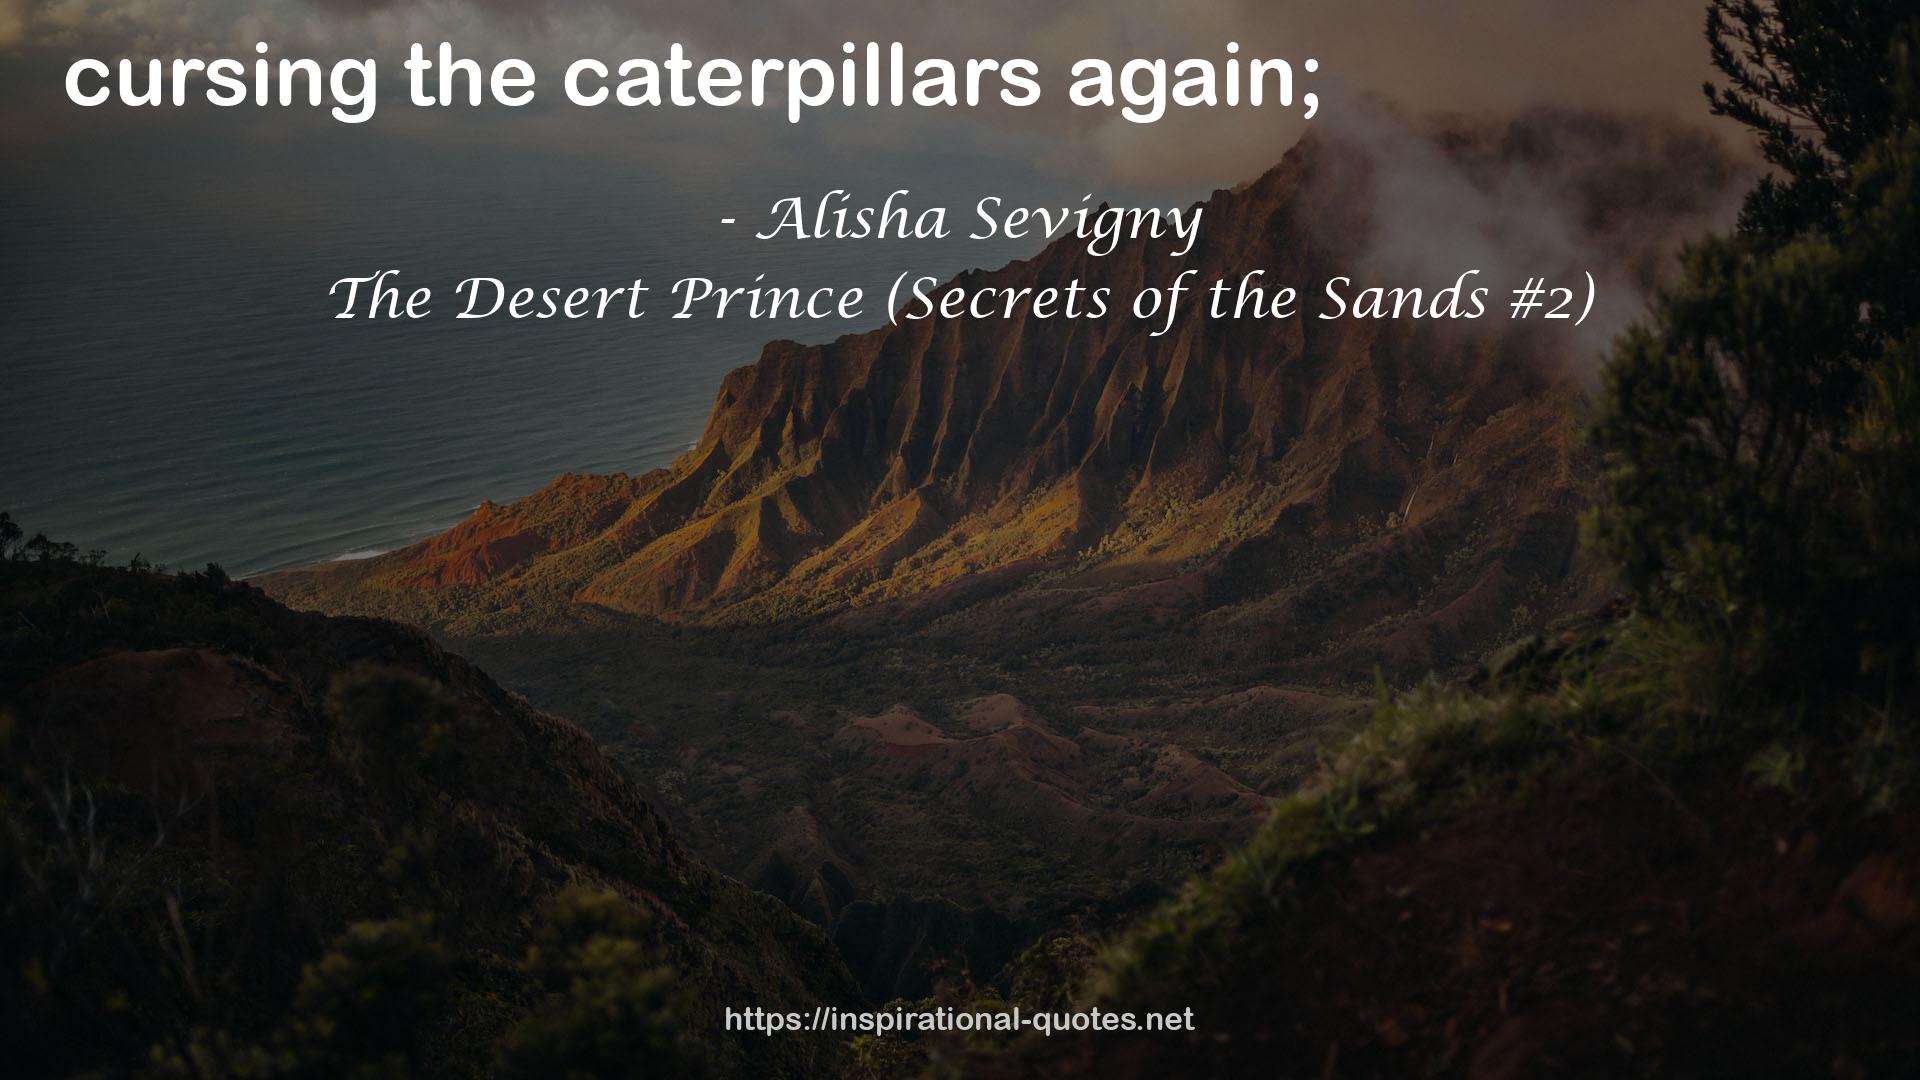 The Desert Prince (Secrets of the Sands #2) QUOTES